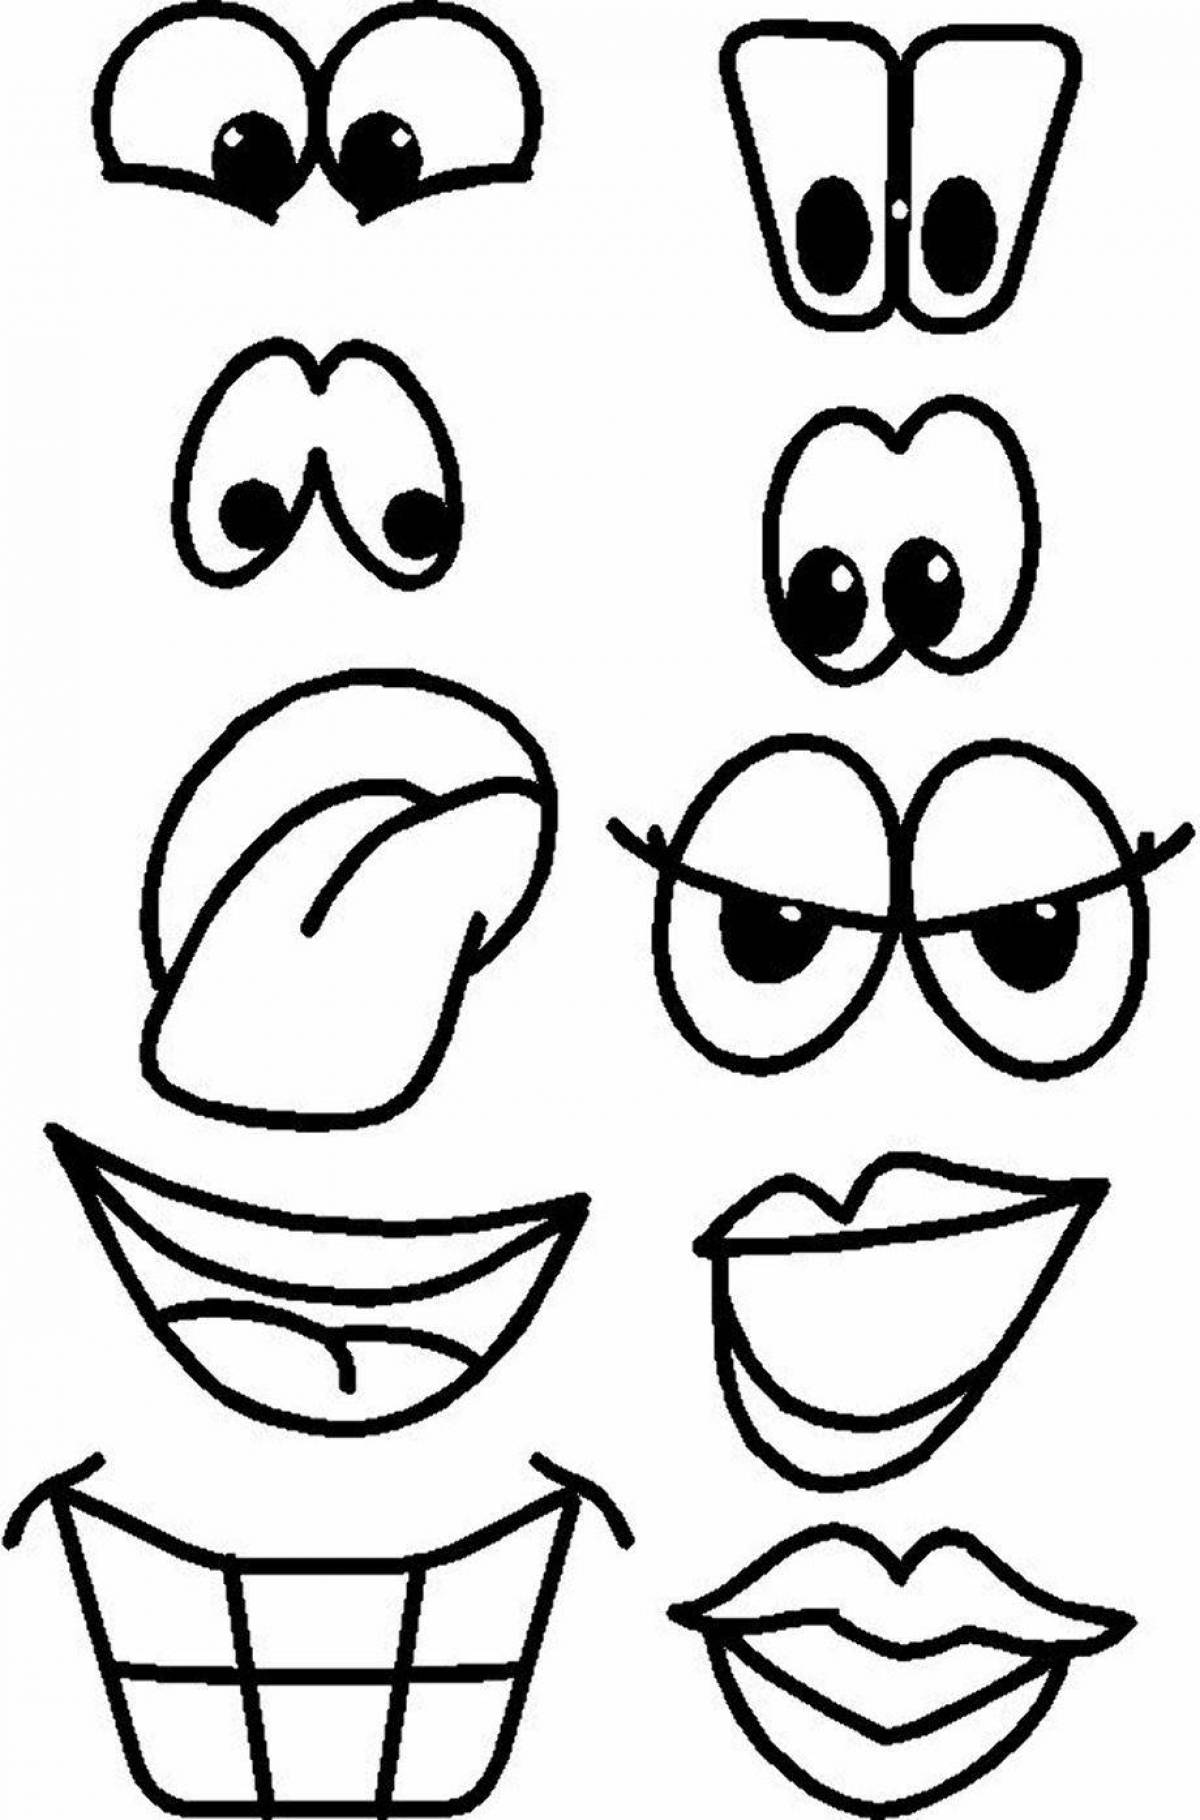 Coloring funny mouth for kids